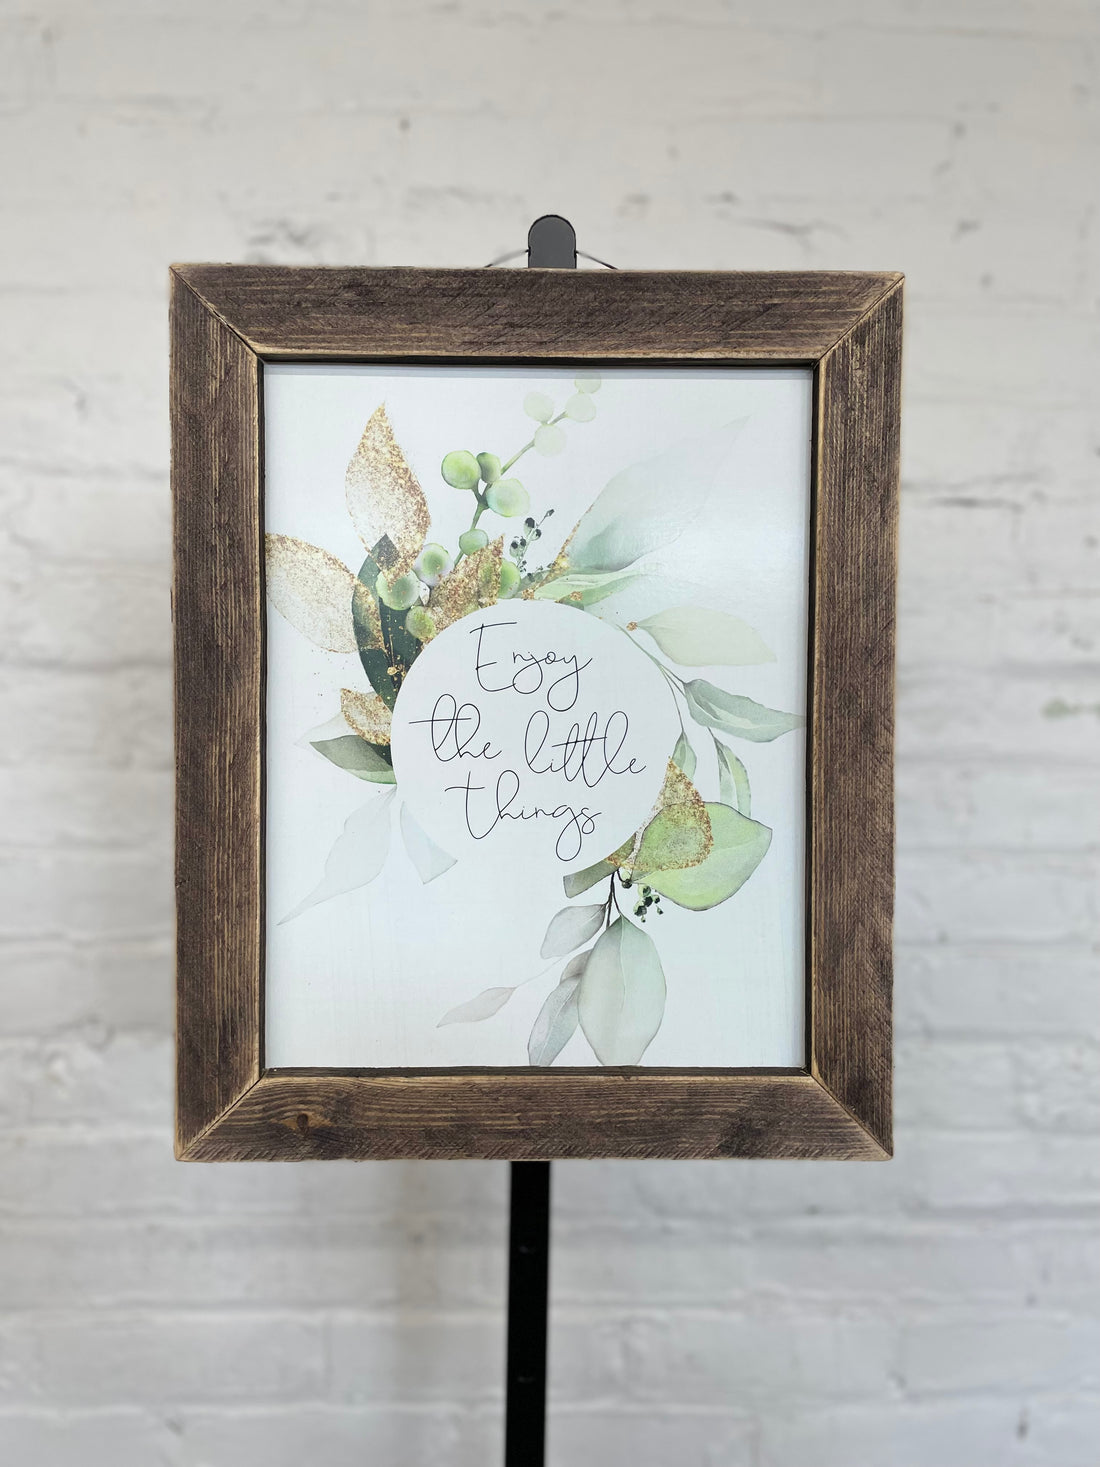 Jan Michaels' Little Things Hanging Sign - Brown Stain Frame